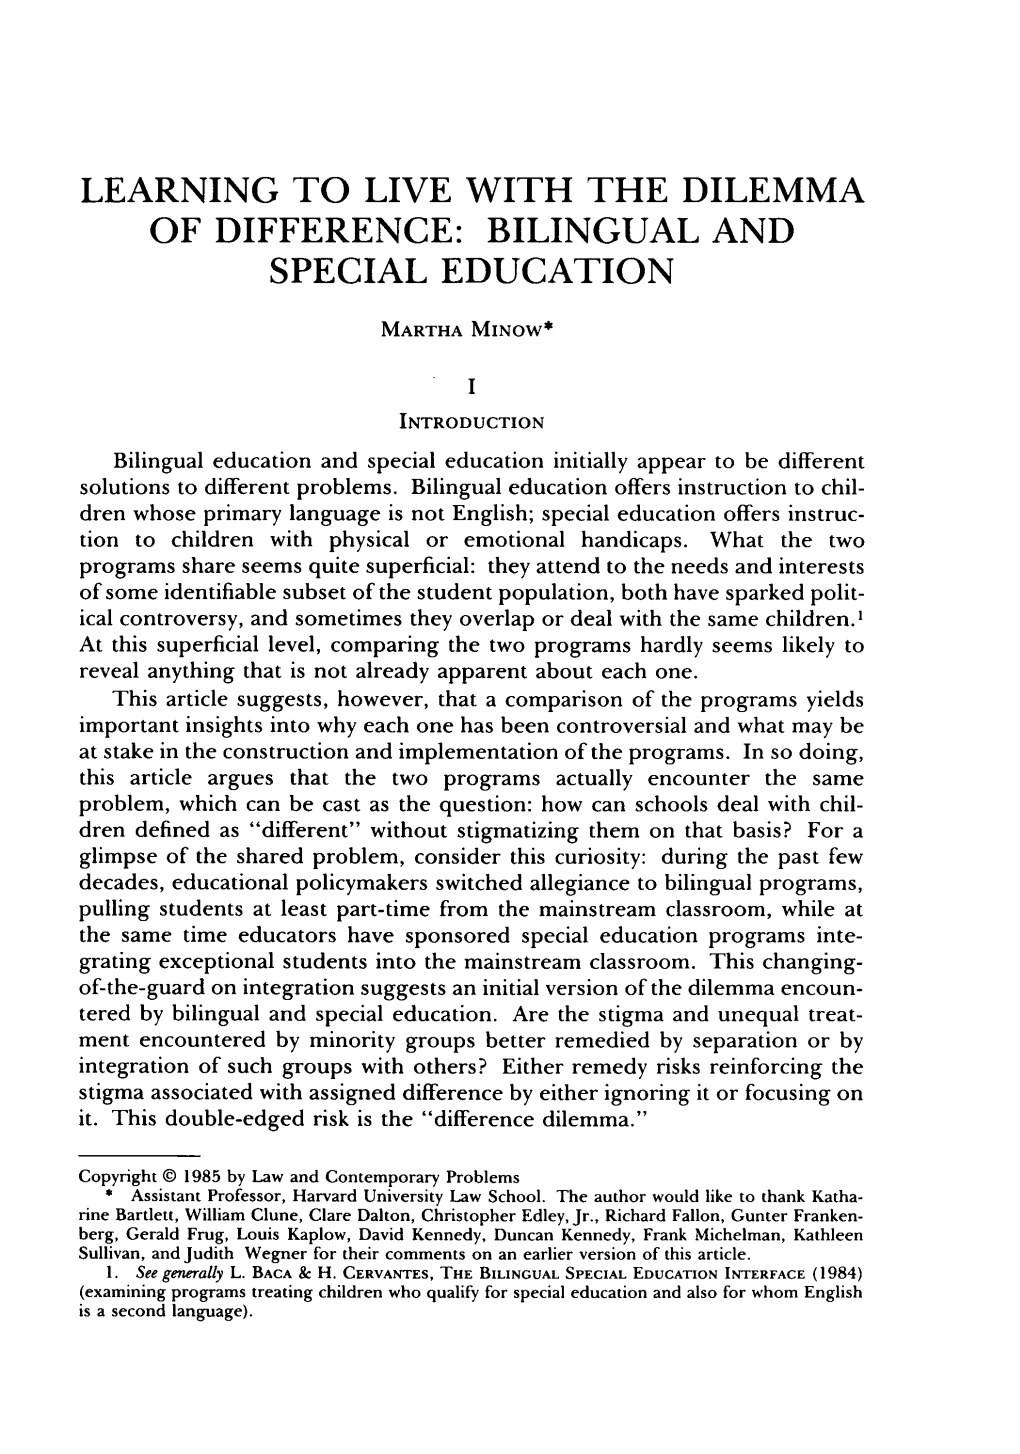 Bilingual and Special Education